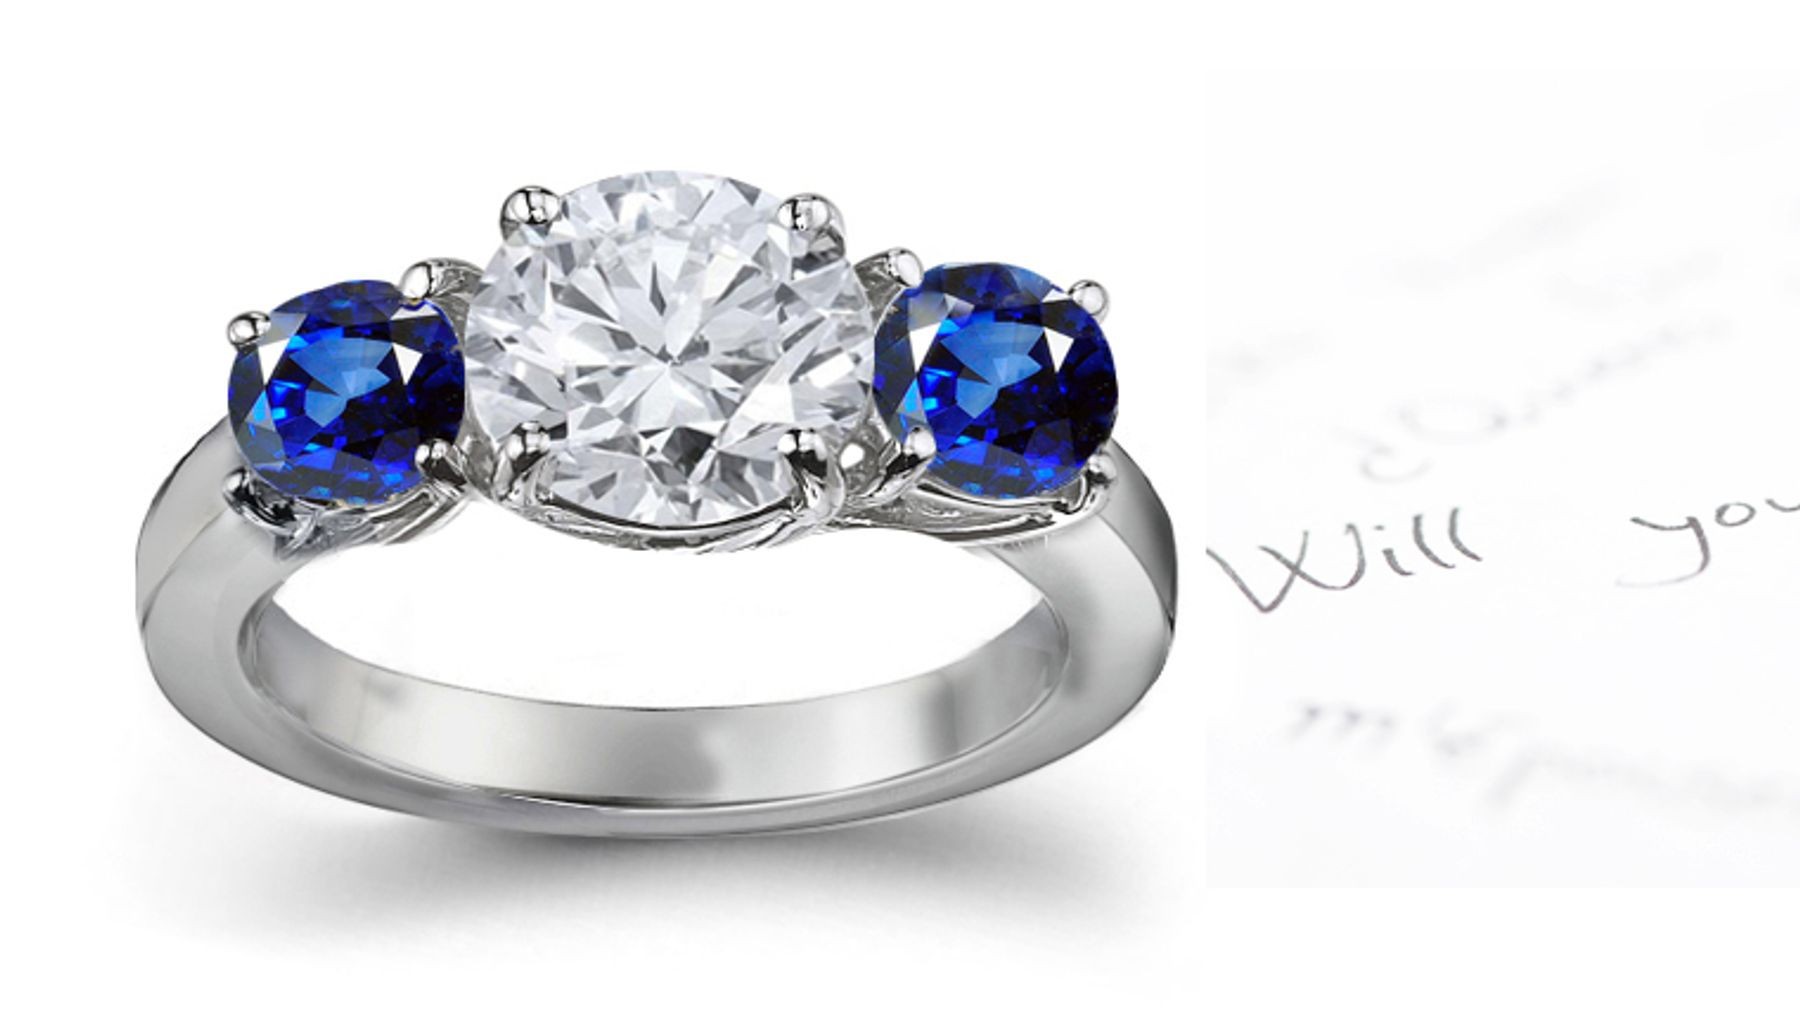 Classical Essential: An Exceptional Royal Blue Sapphire & Diamond Engagement Ring. 